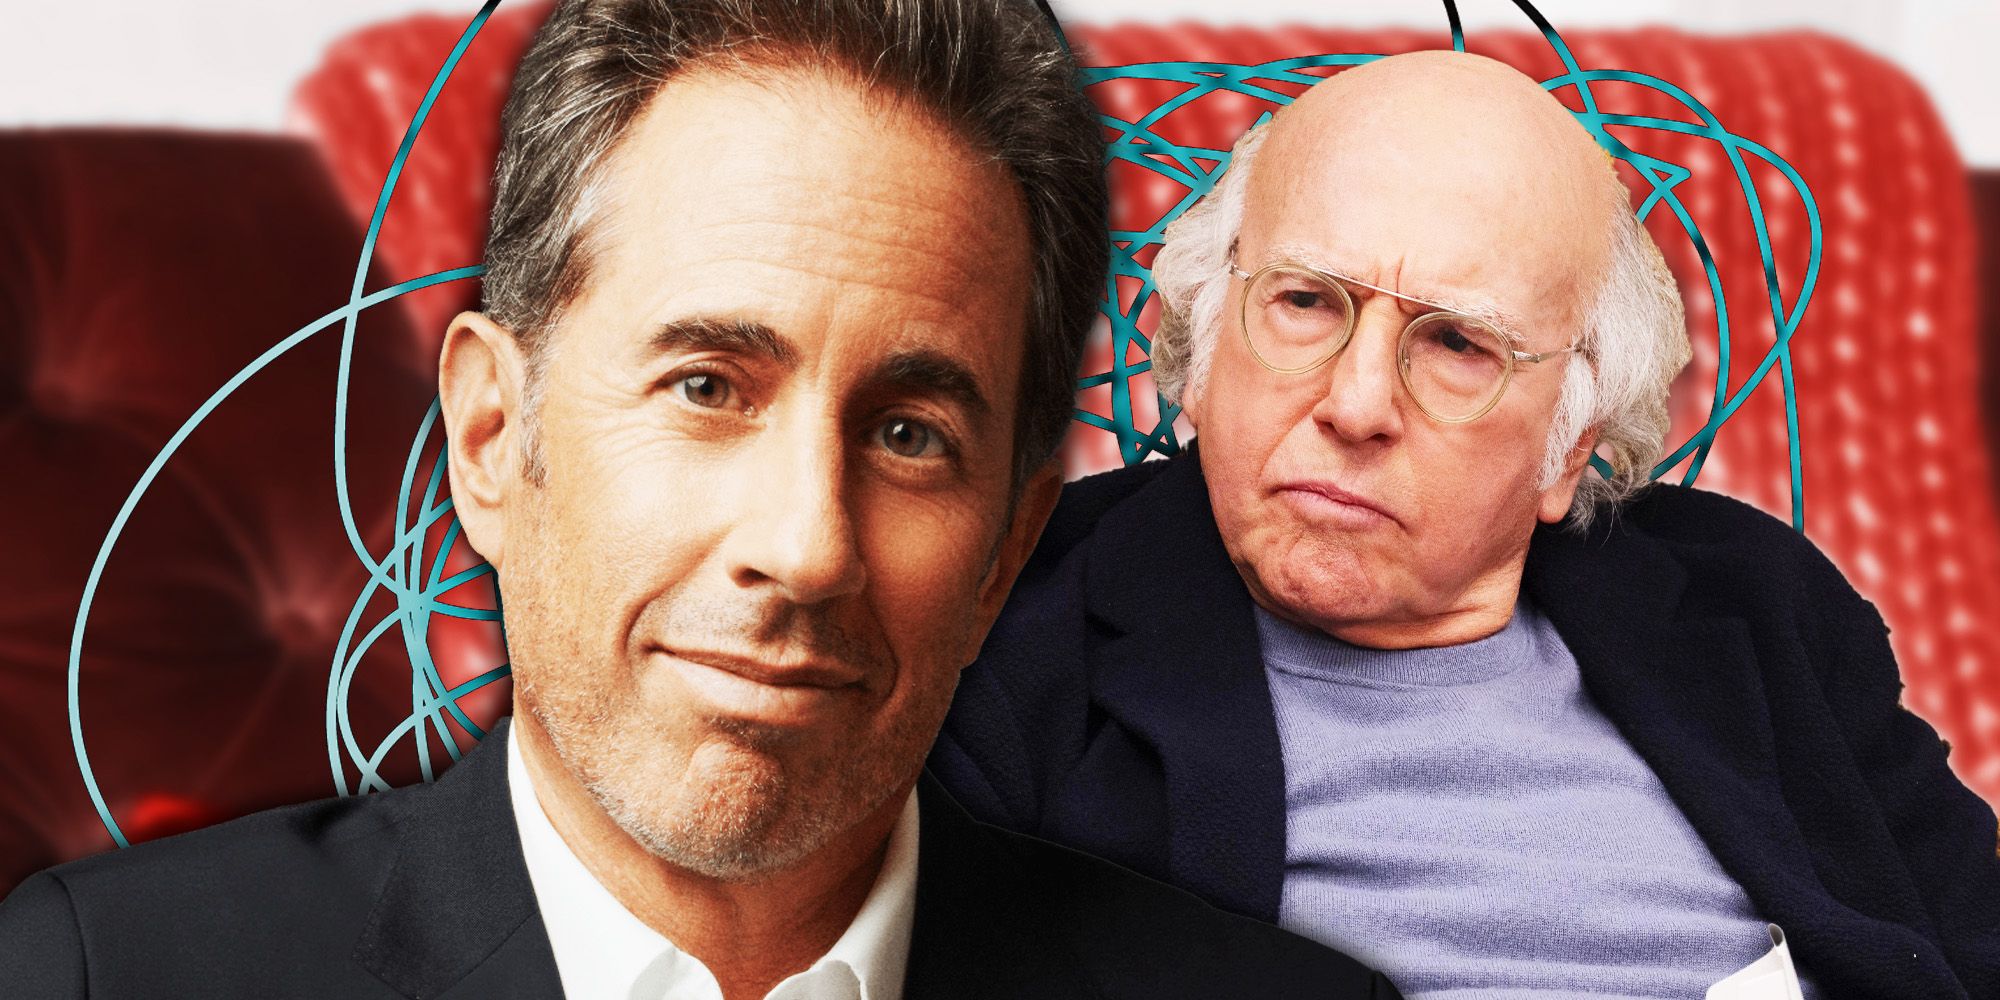 Jerry Seinfeld and Larry David from Curb Your Enthusiasm